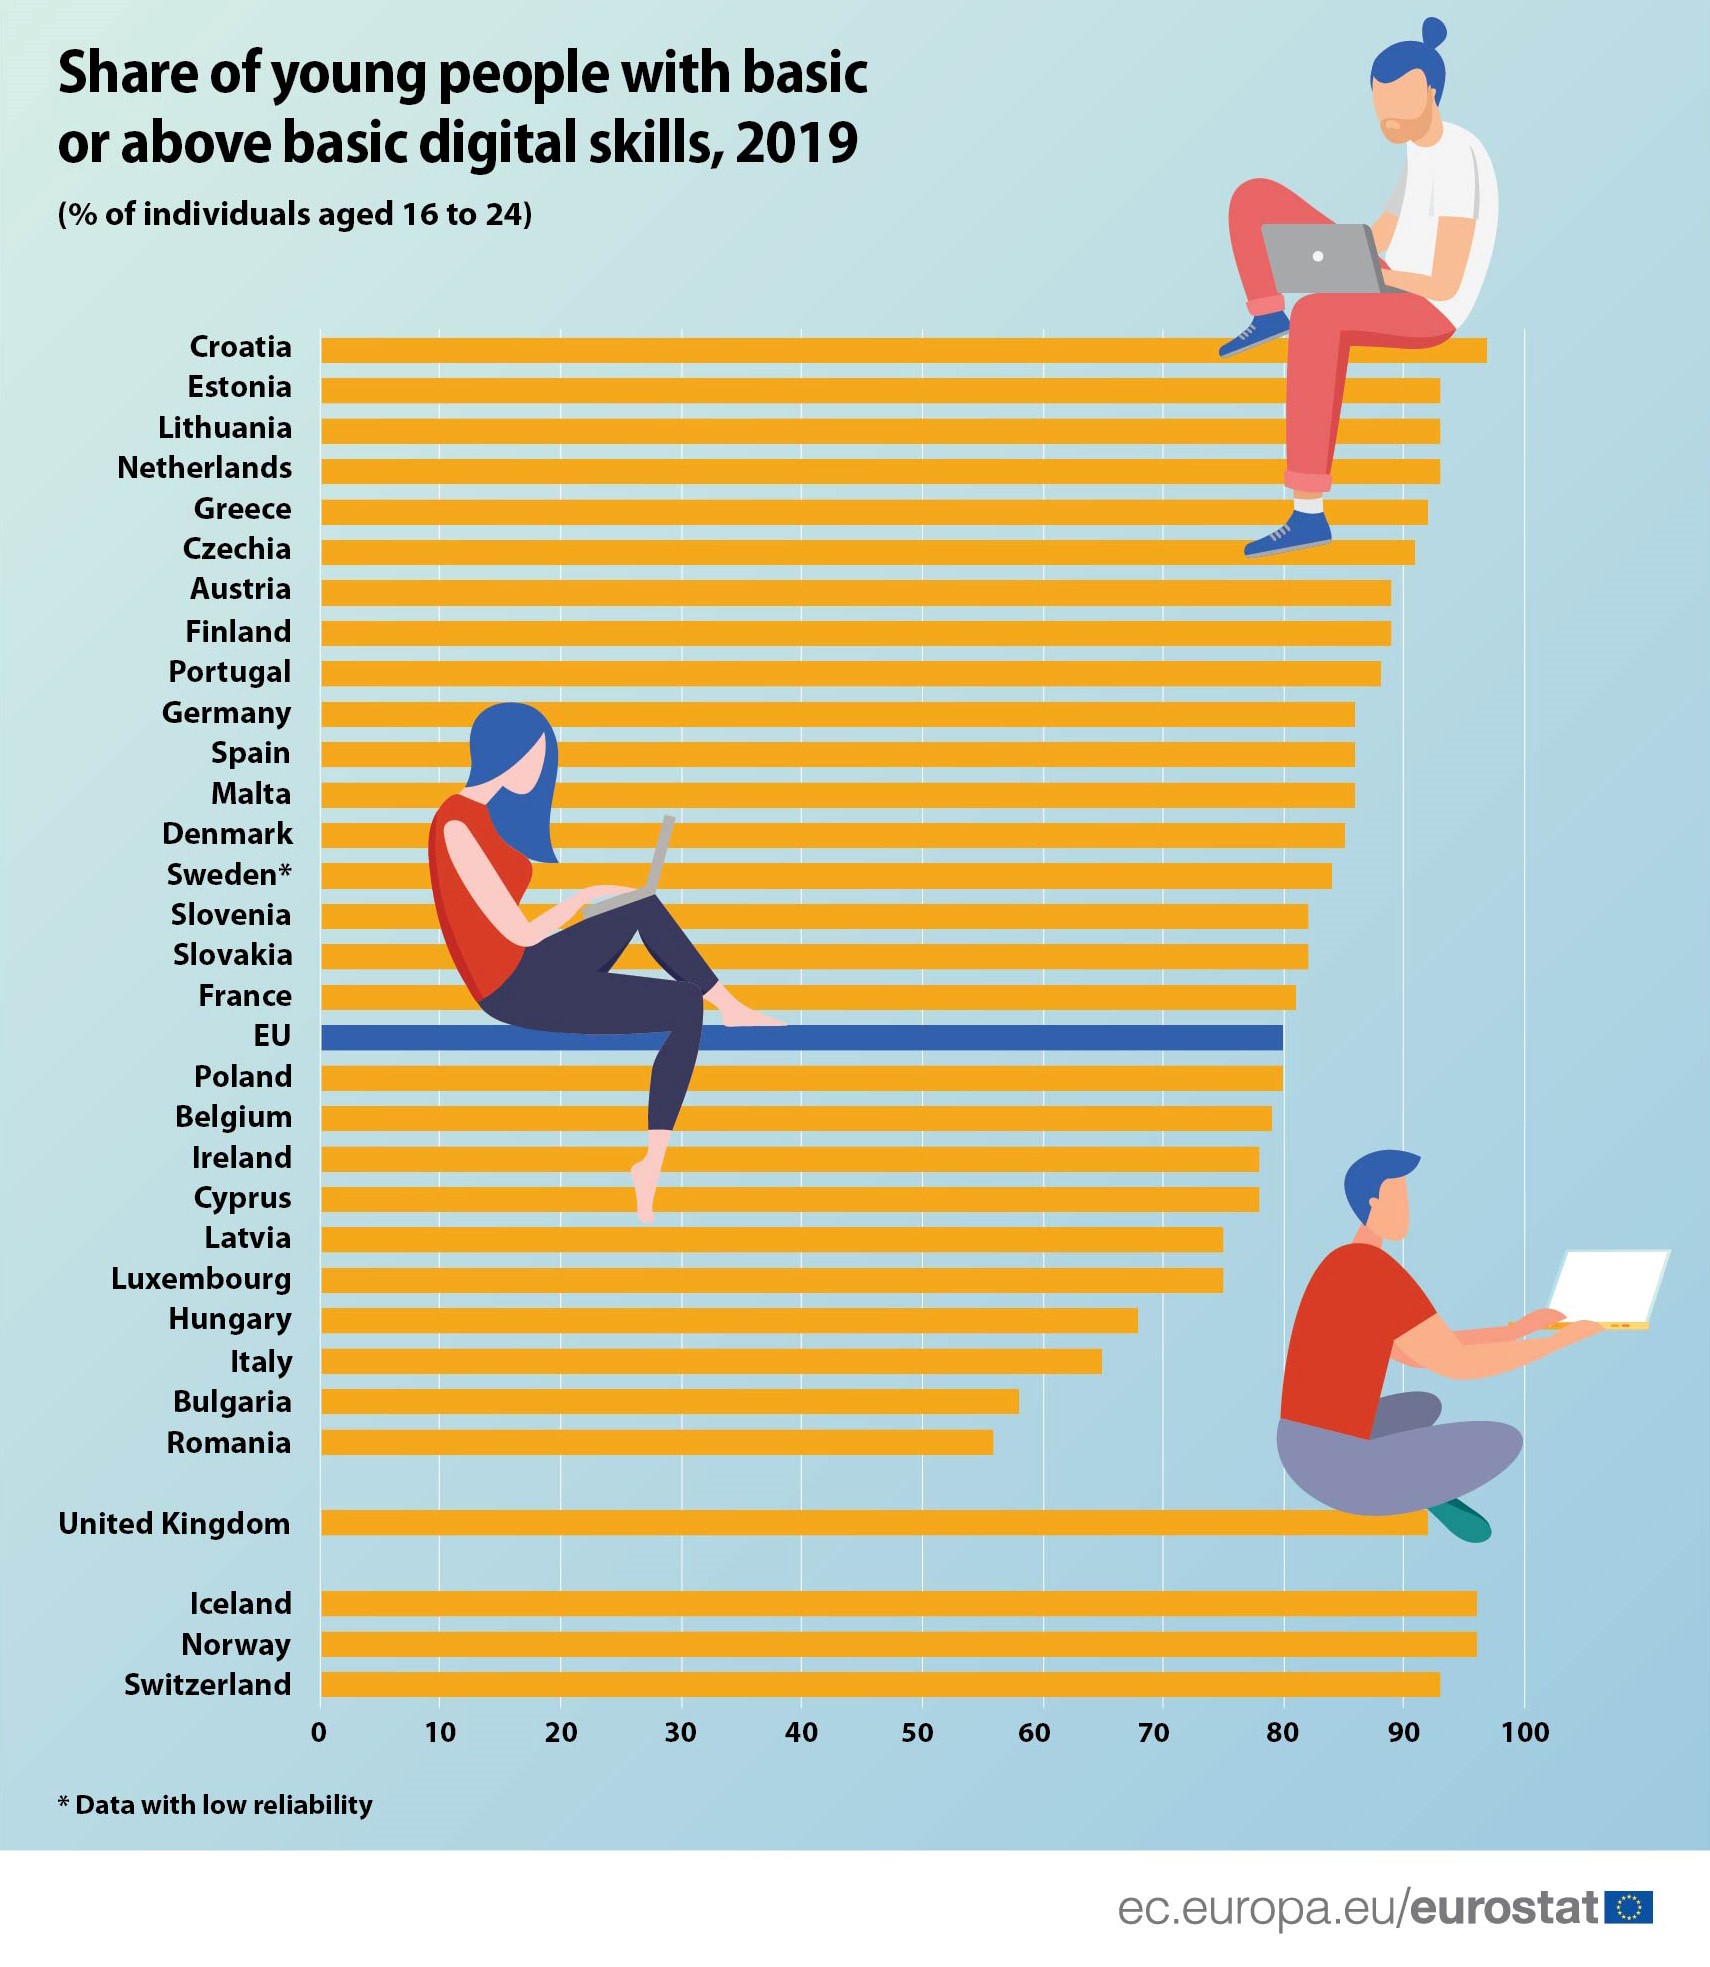 Digital skills of young people in the EU